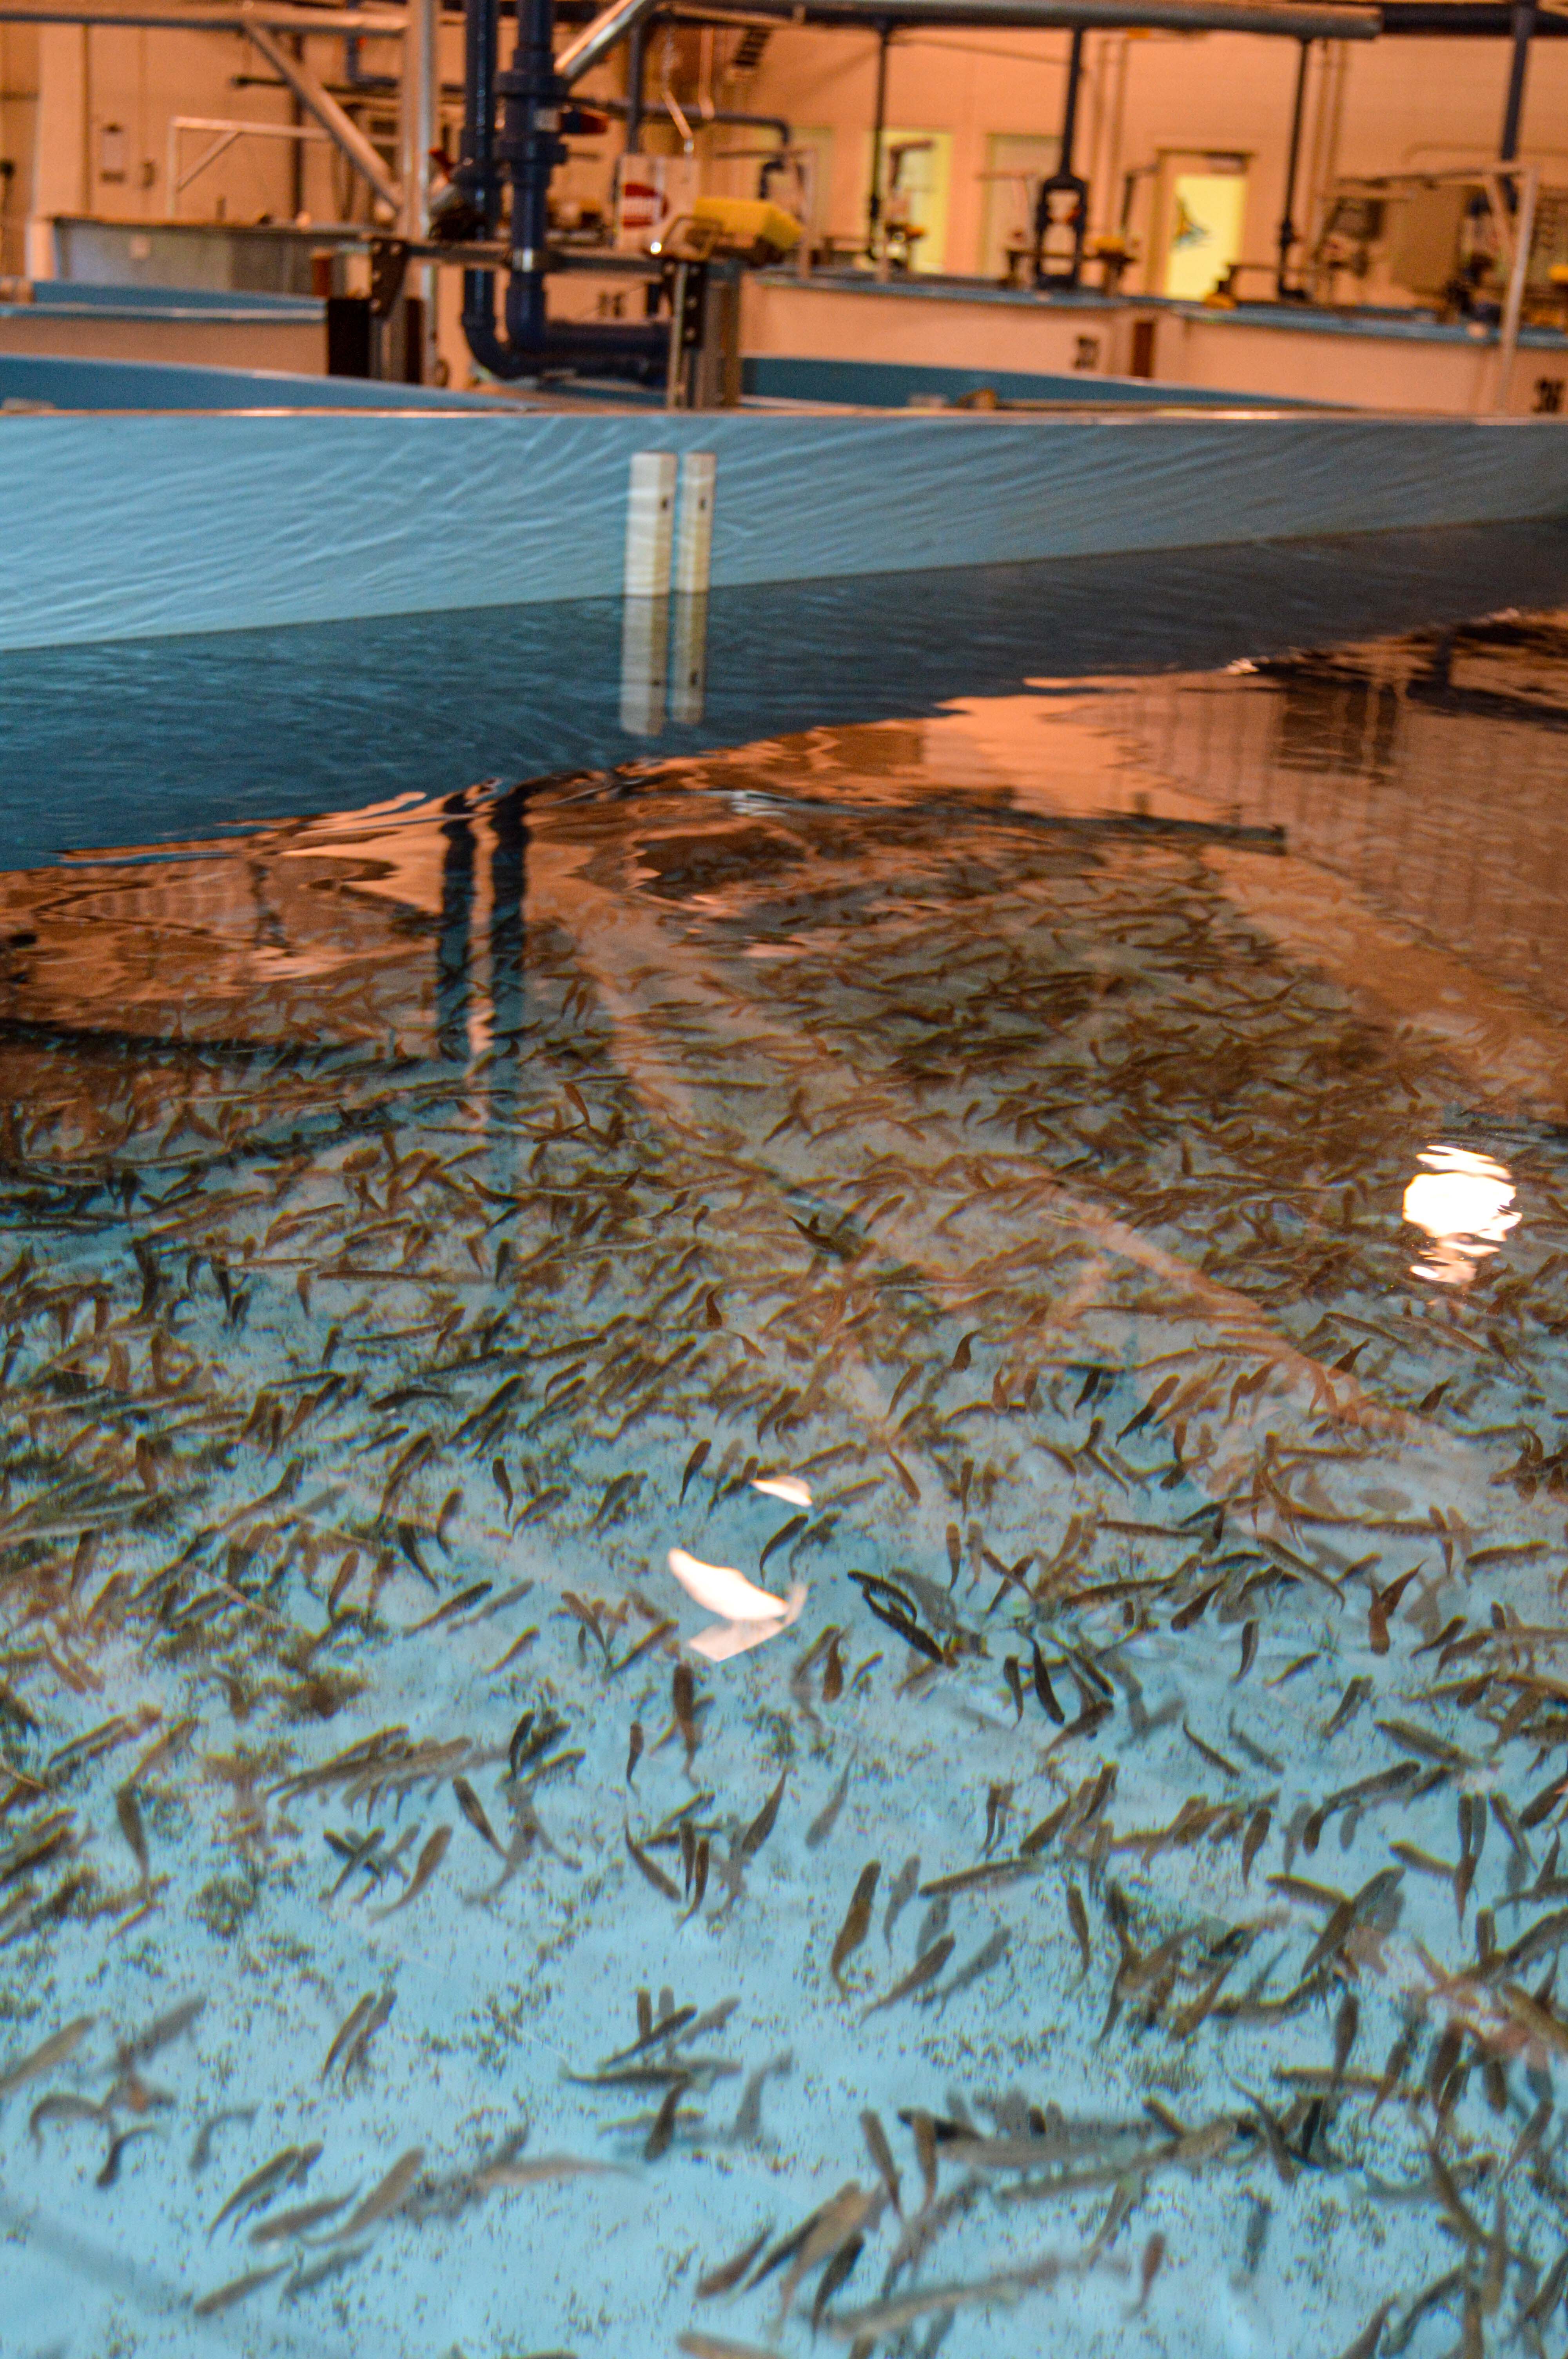 Showcasing the DNR: One hundred and fifty years of Michigan fish hatcheries